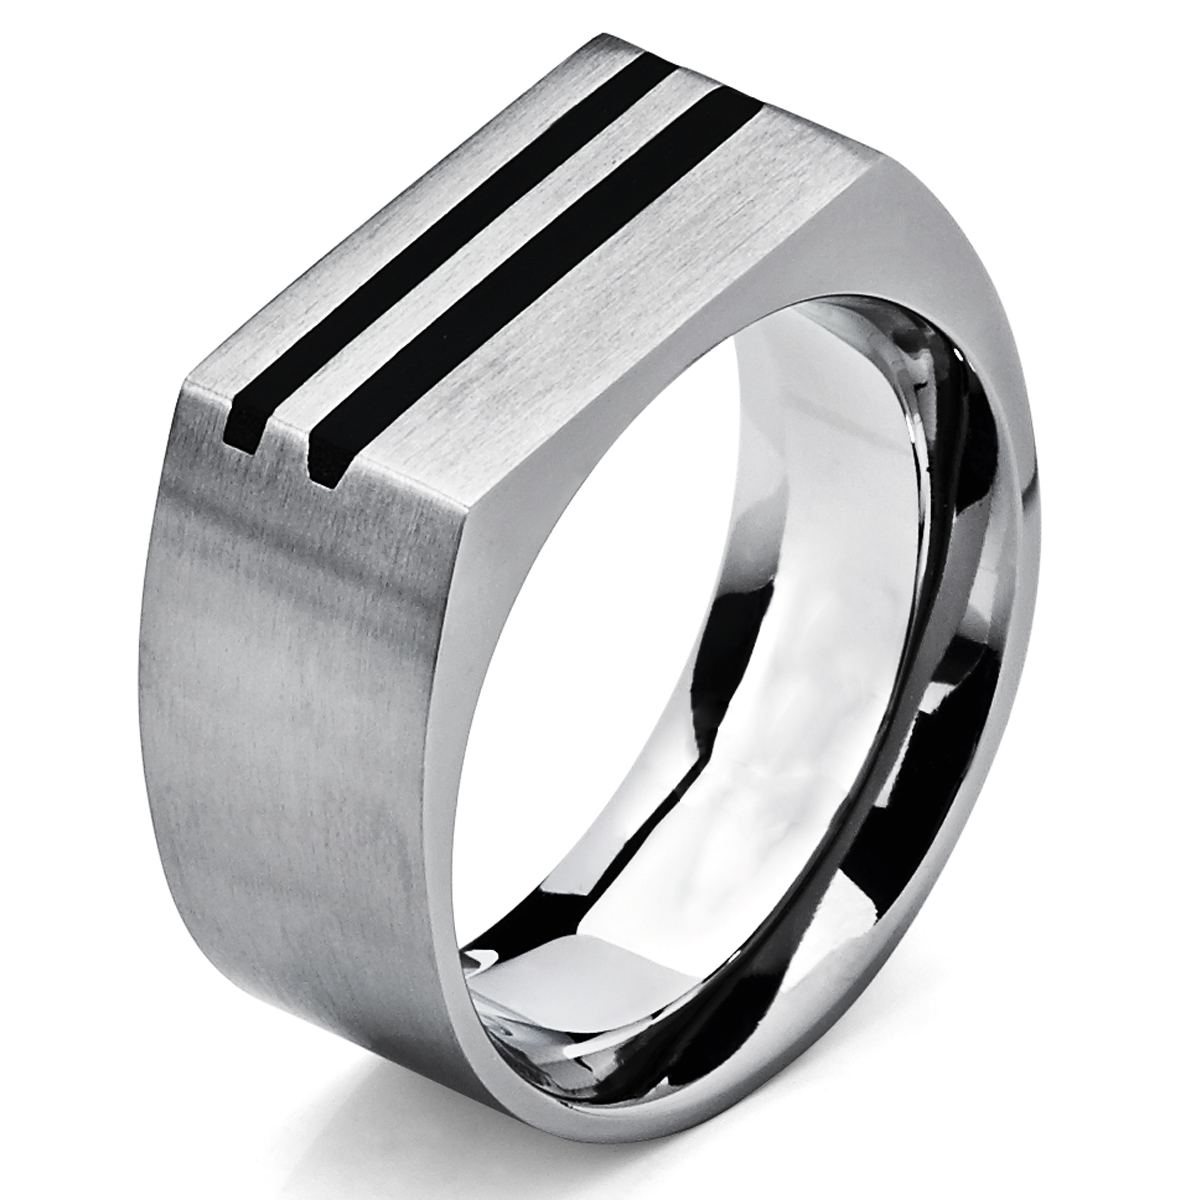 Metal Masters Co. Men's Bold Titanium Pinky Ring Bands with Resin Inlay, Brushed Finish Comfort Fit 10mm Wide